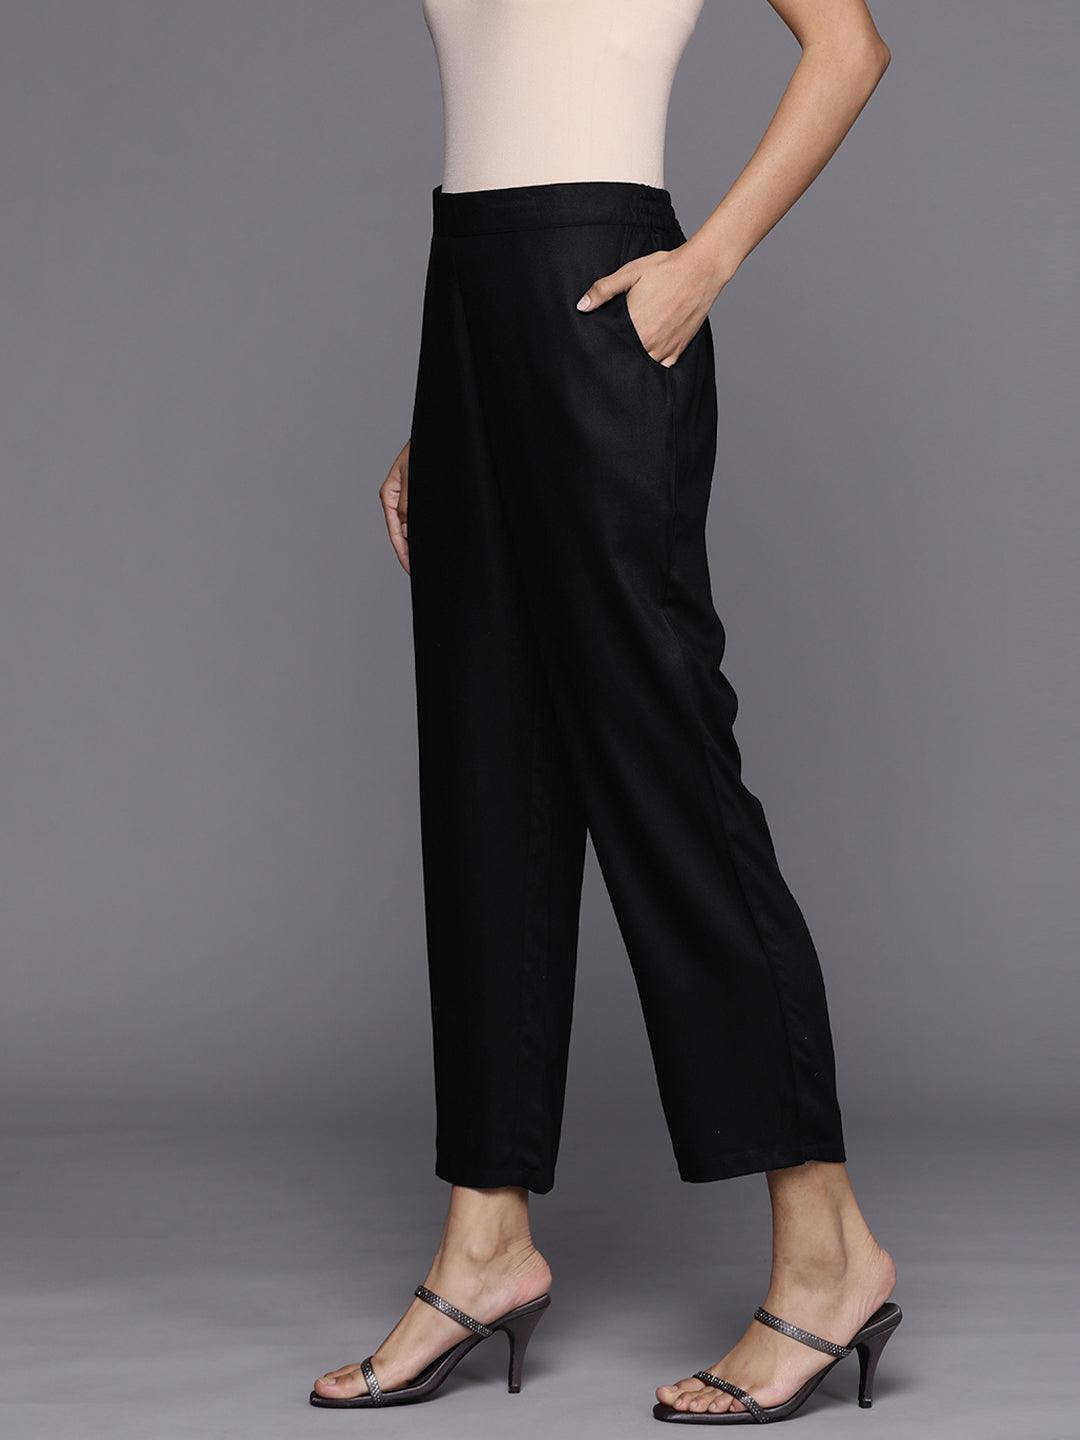 Black Solid Pashmina Wool Trousers